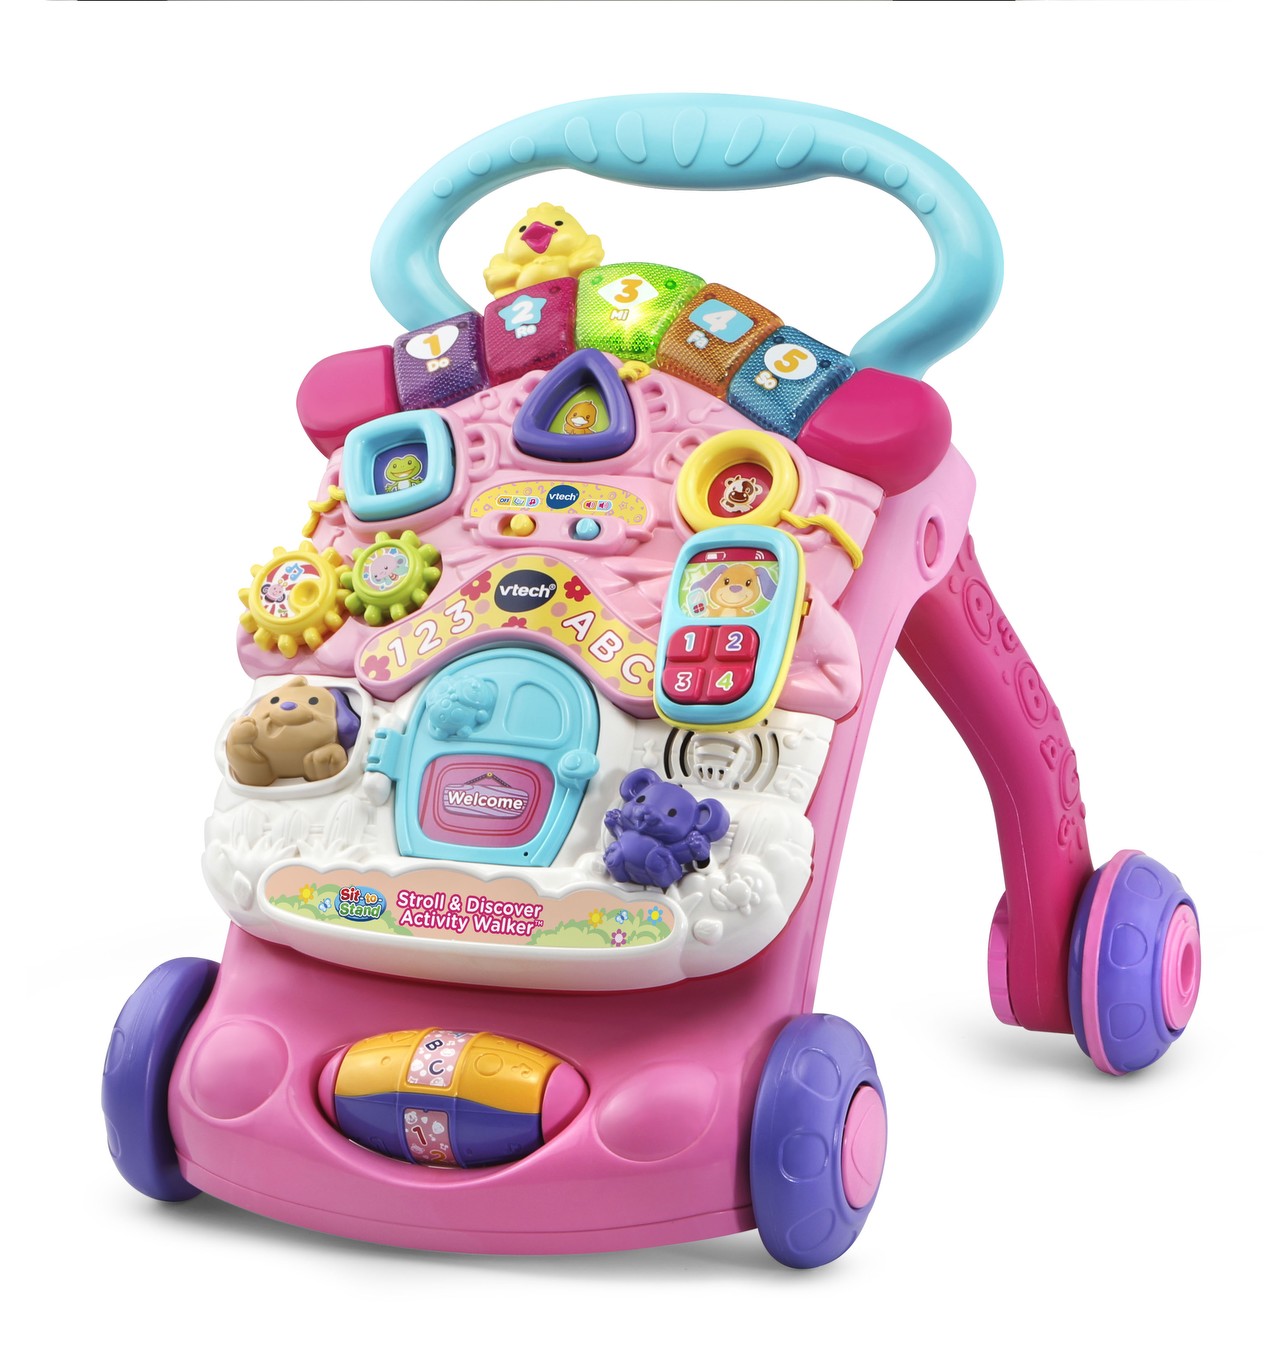 VTech first songs, Musical book, pink Color. Music Book with Songs